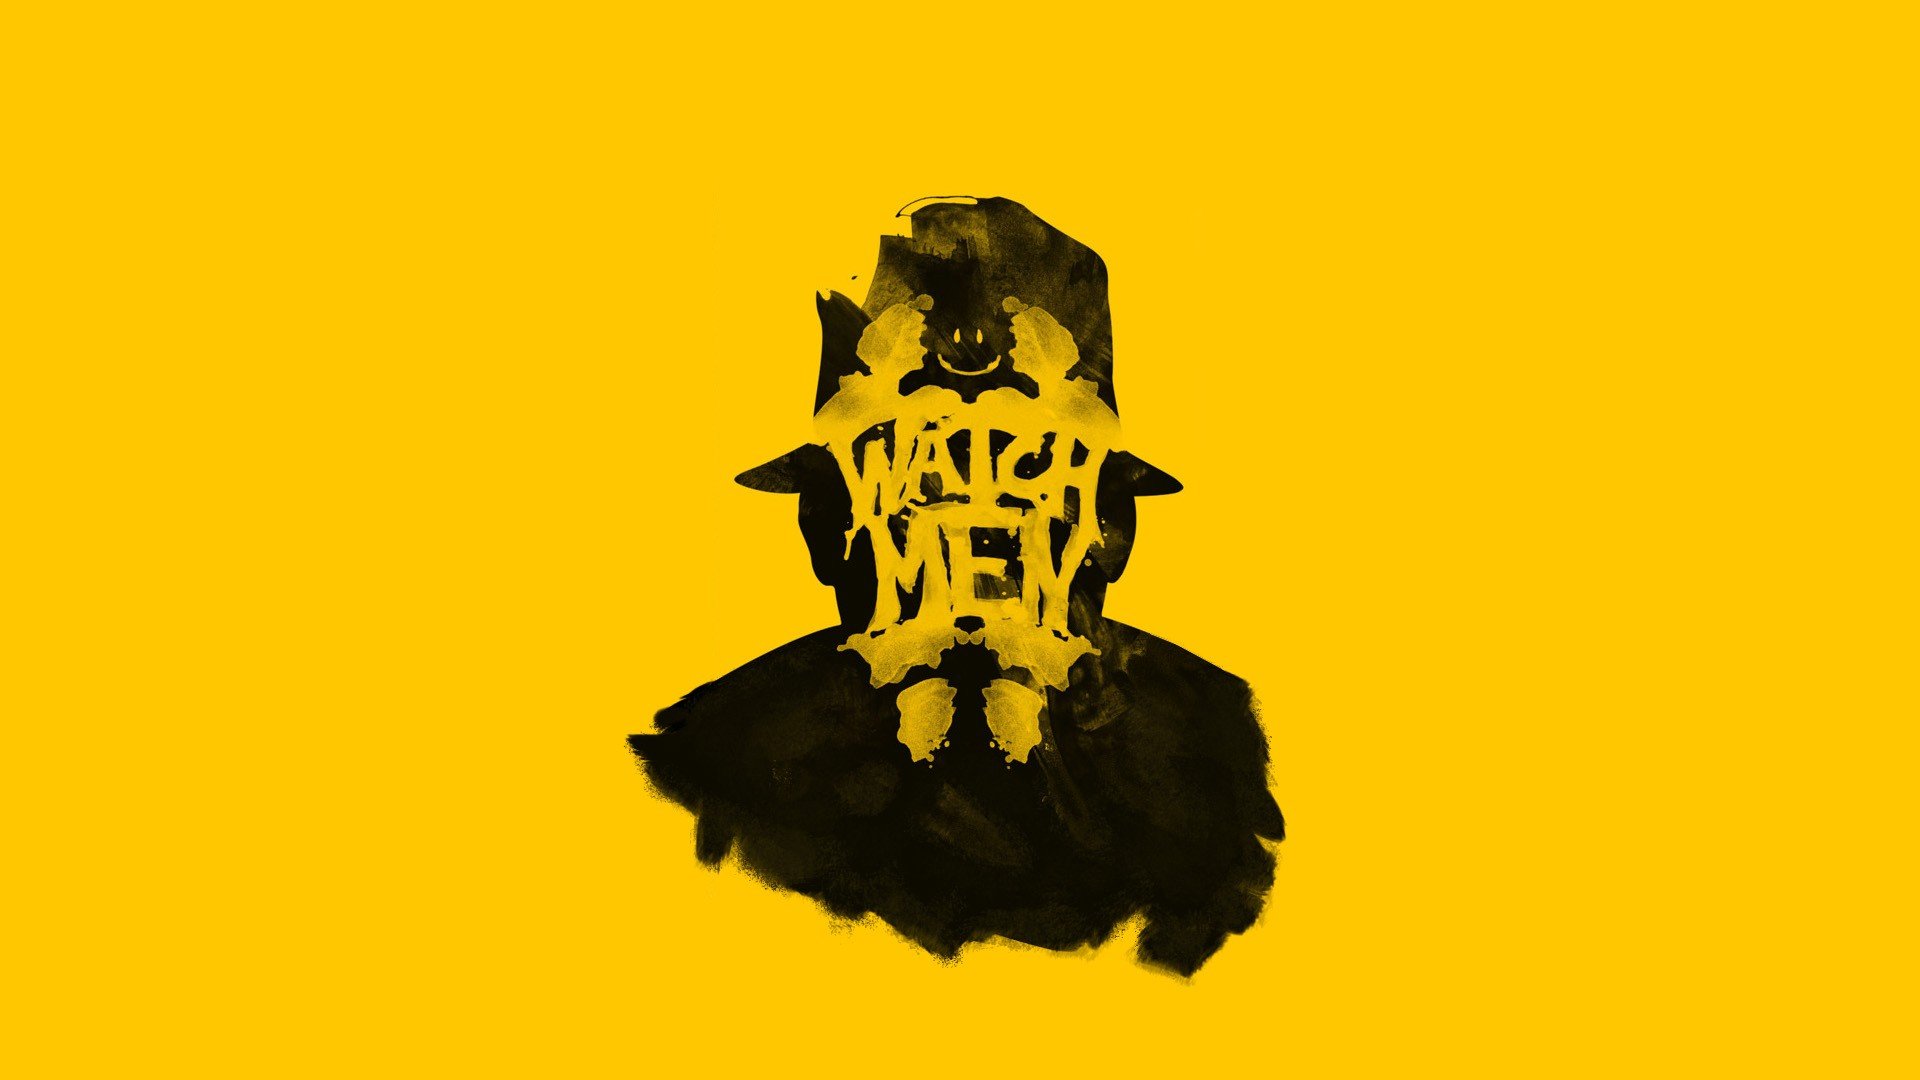 Download hd wallpapers of 369907-Rorschach, Adam_Sidwell, Yellow, Minimalis...